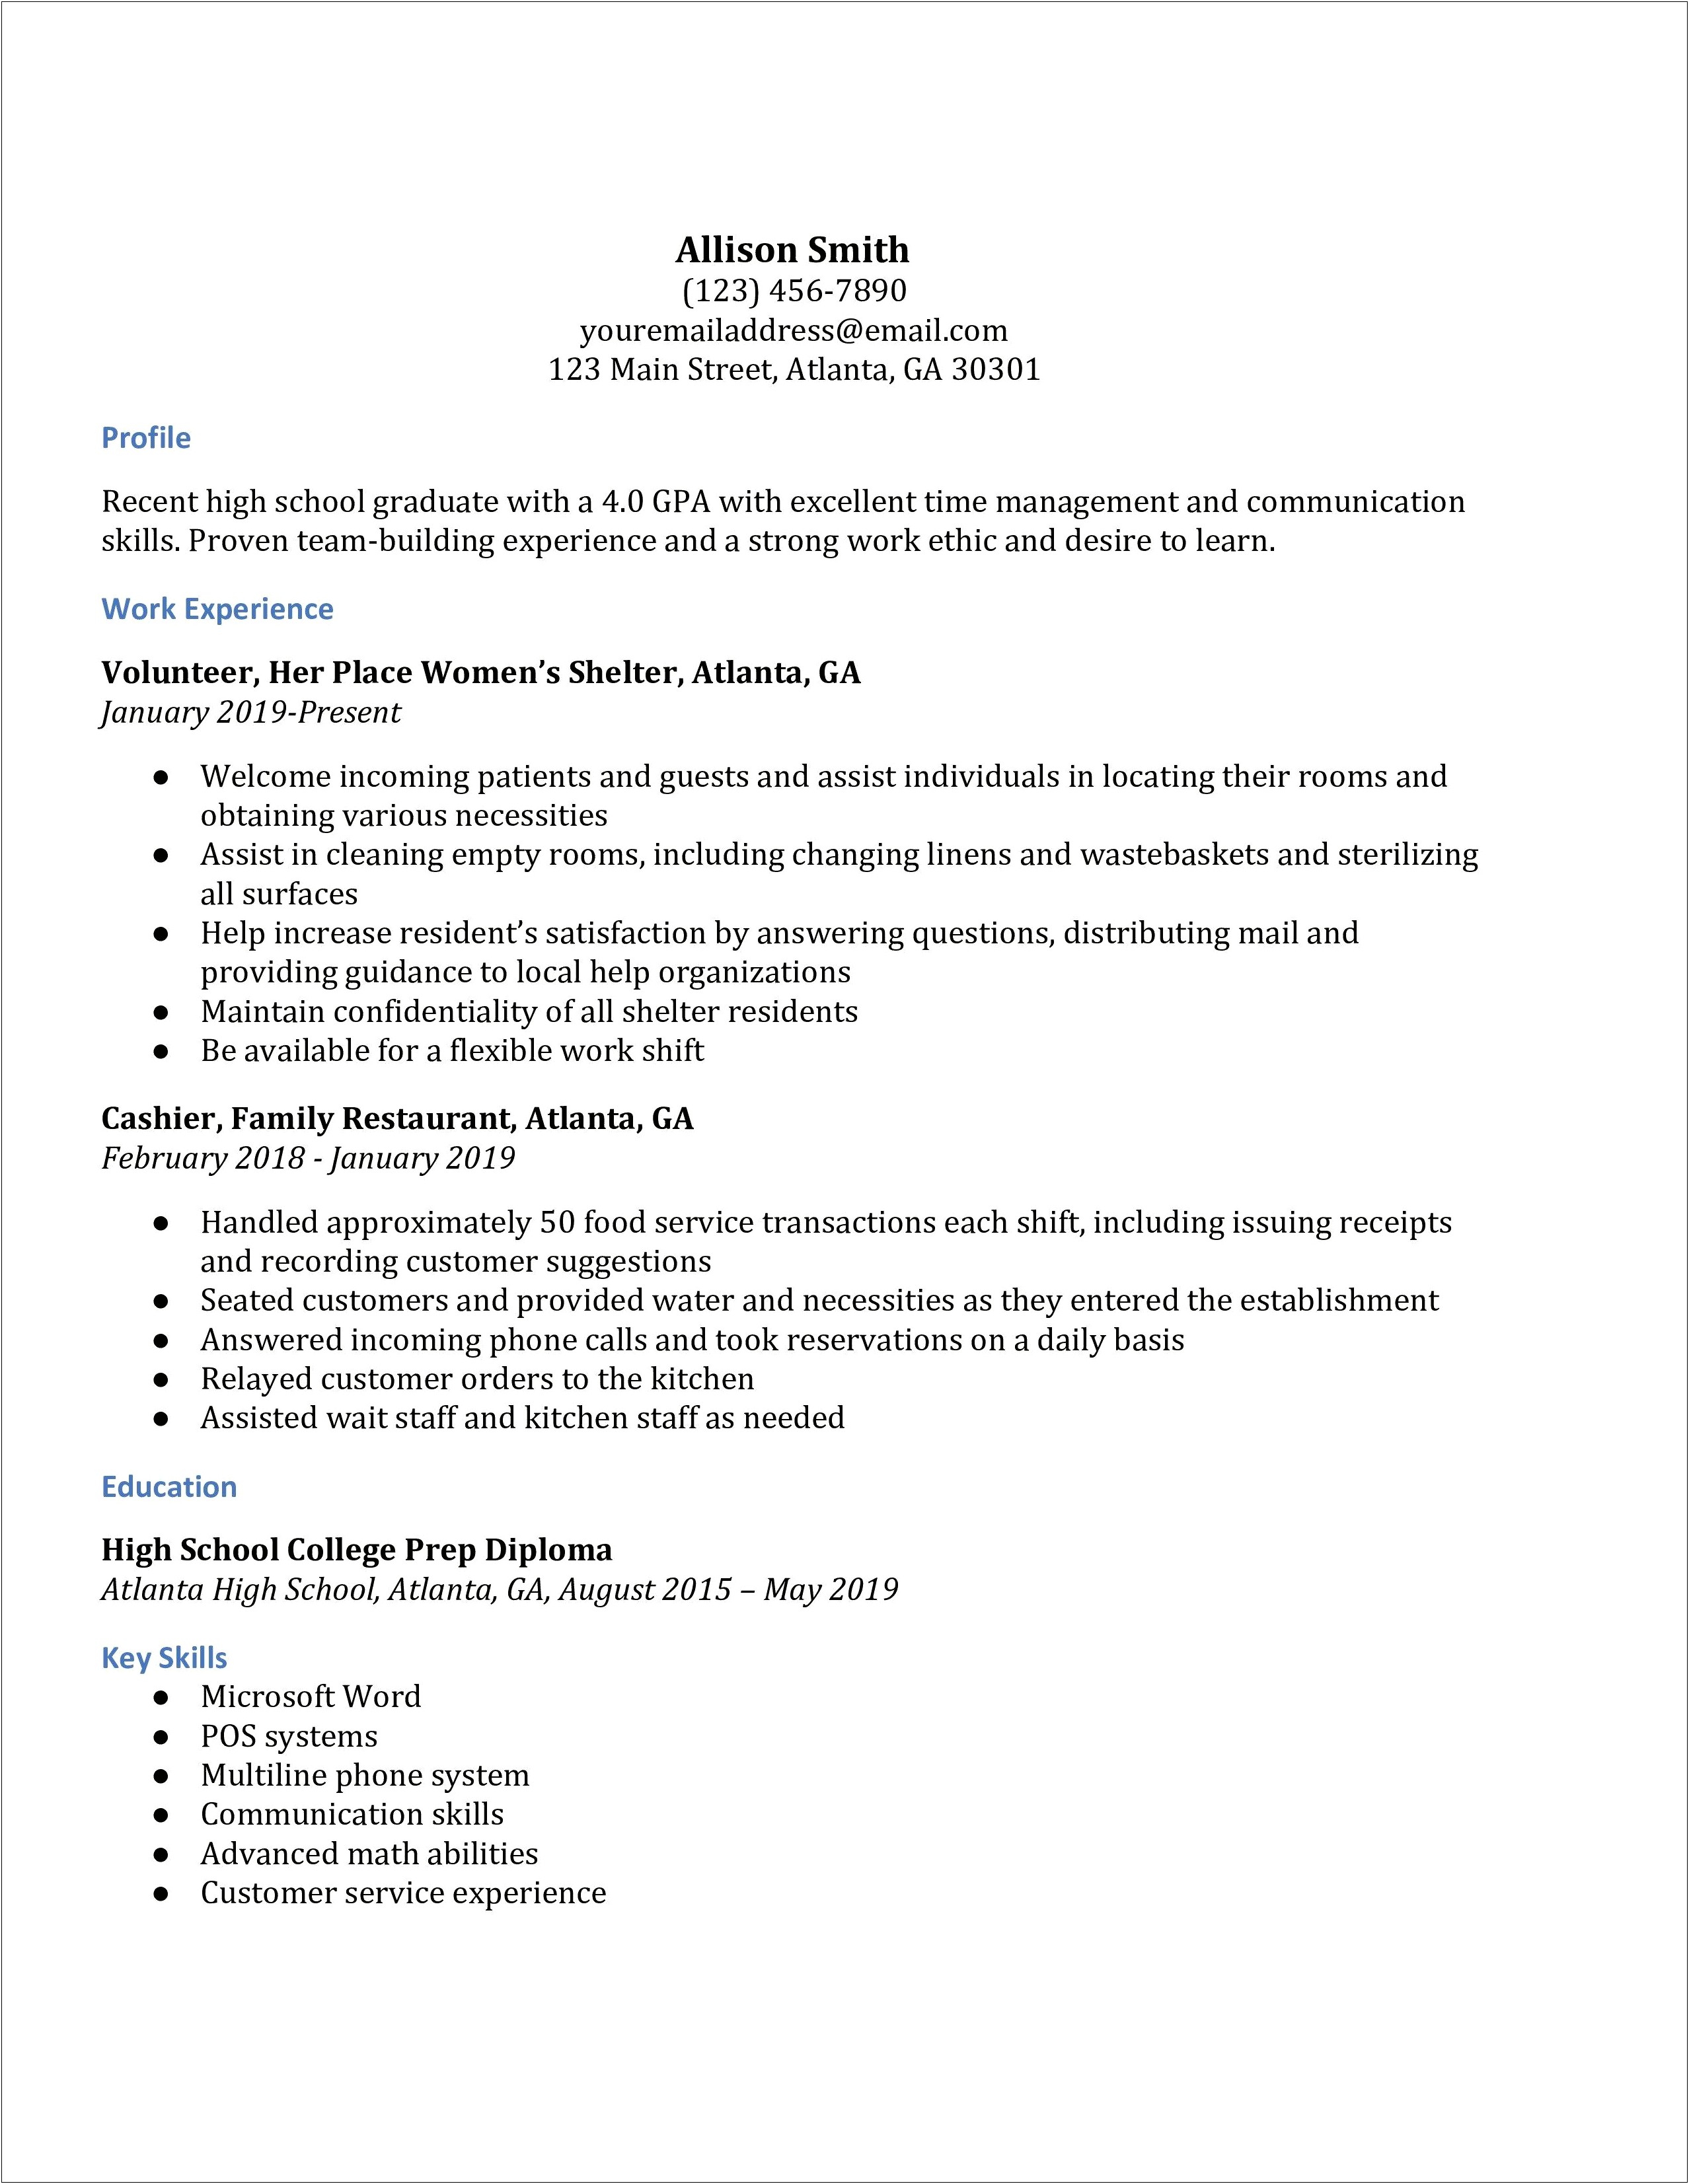 Resume For A High School Student First Job